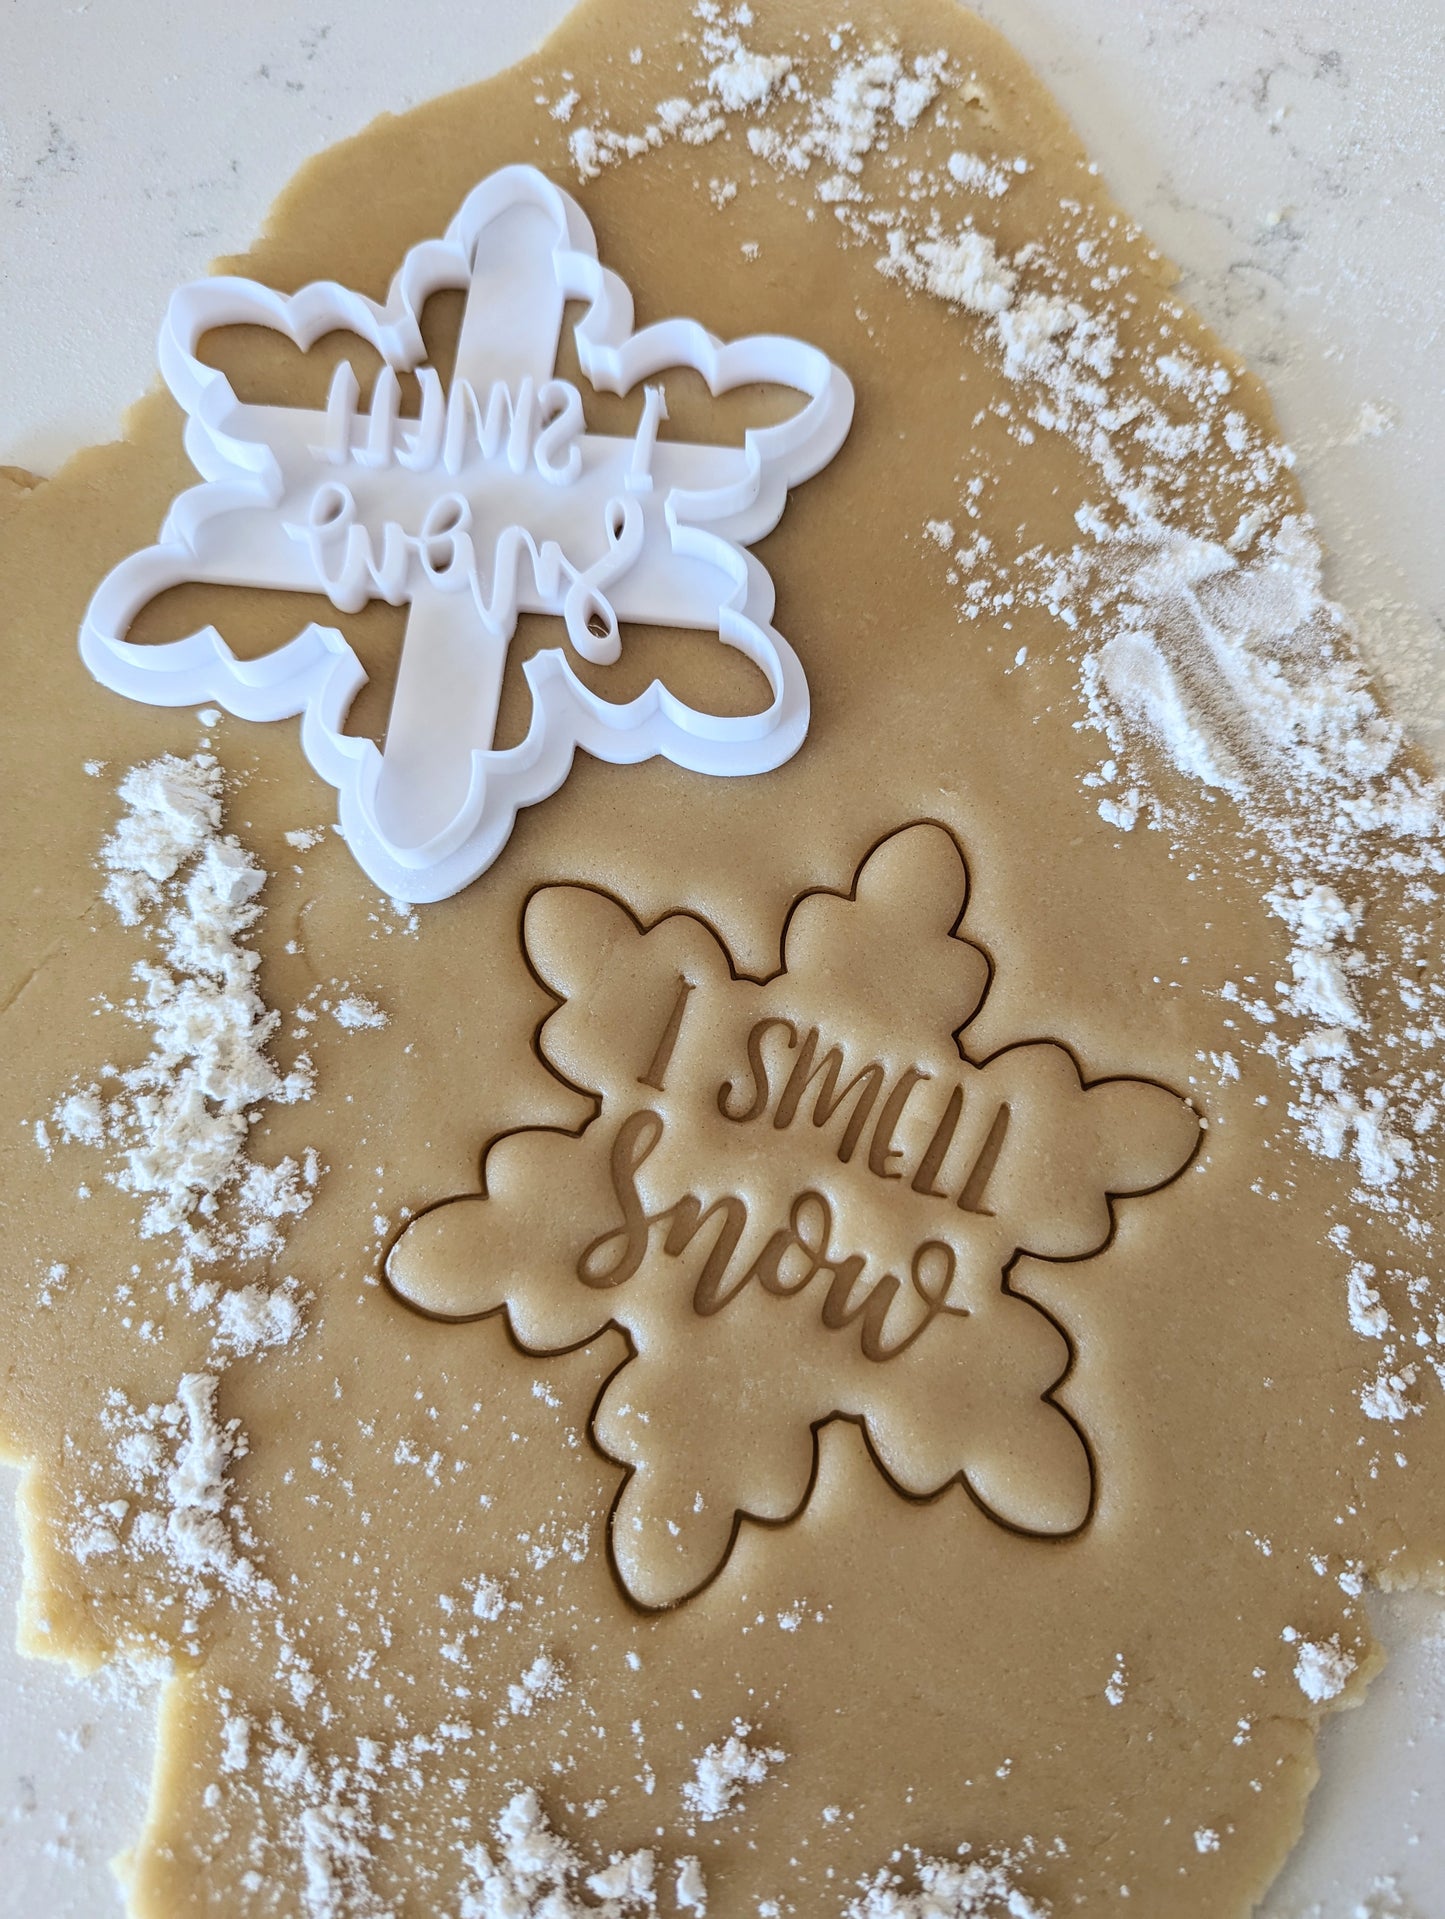 I Smell Snow - Gilmore Girls Cookie Cutters